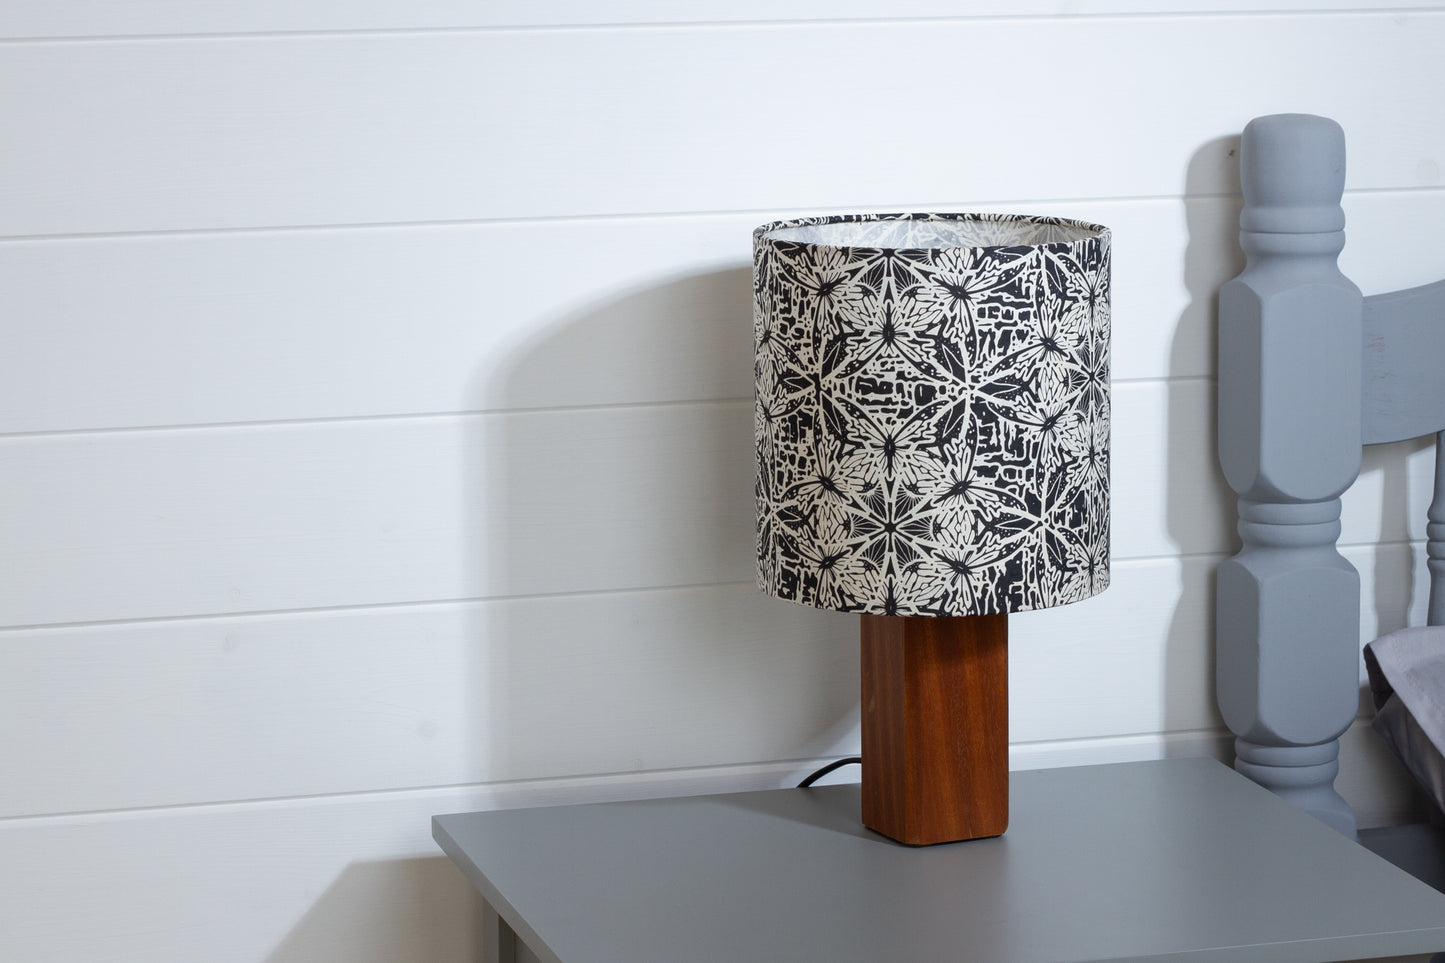 Square Sapele Table Lamp with 20cm Drum Lamp Shade B136 ~ Butterfly Kaleidoscope Black